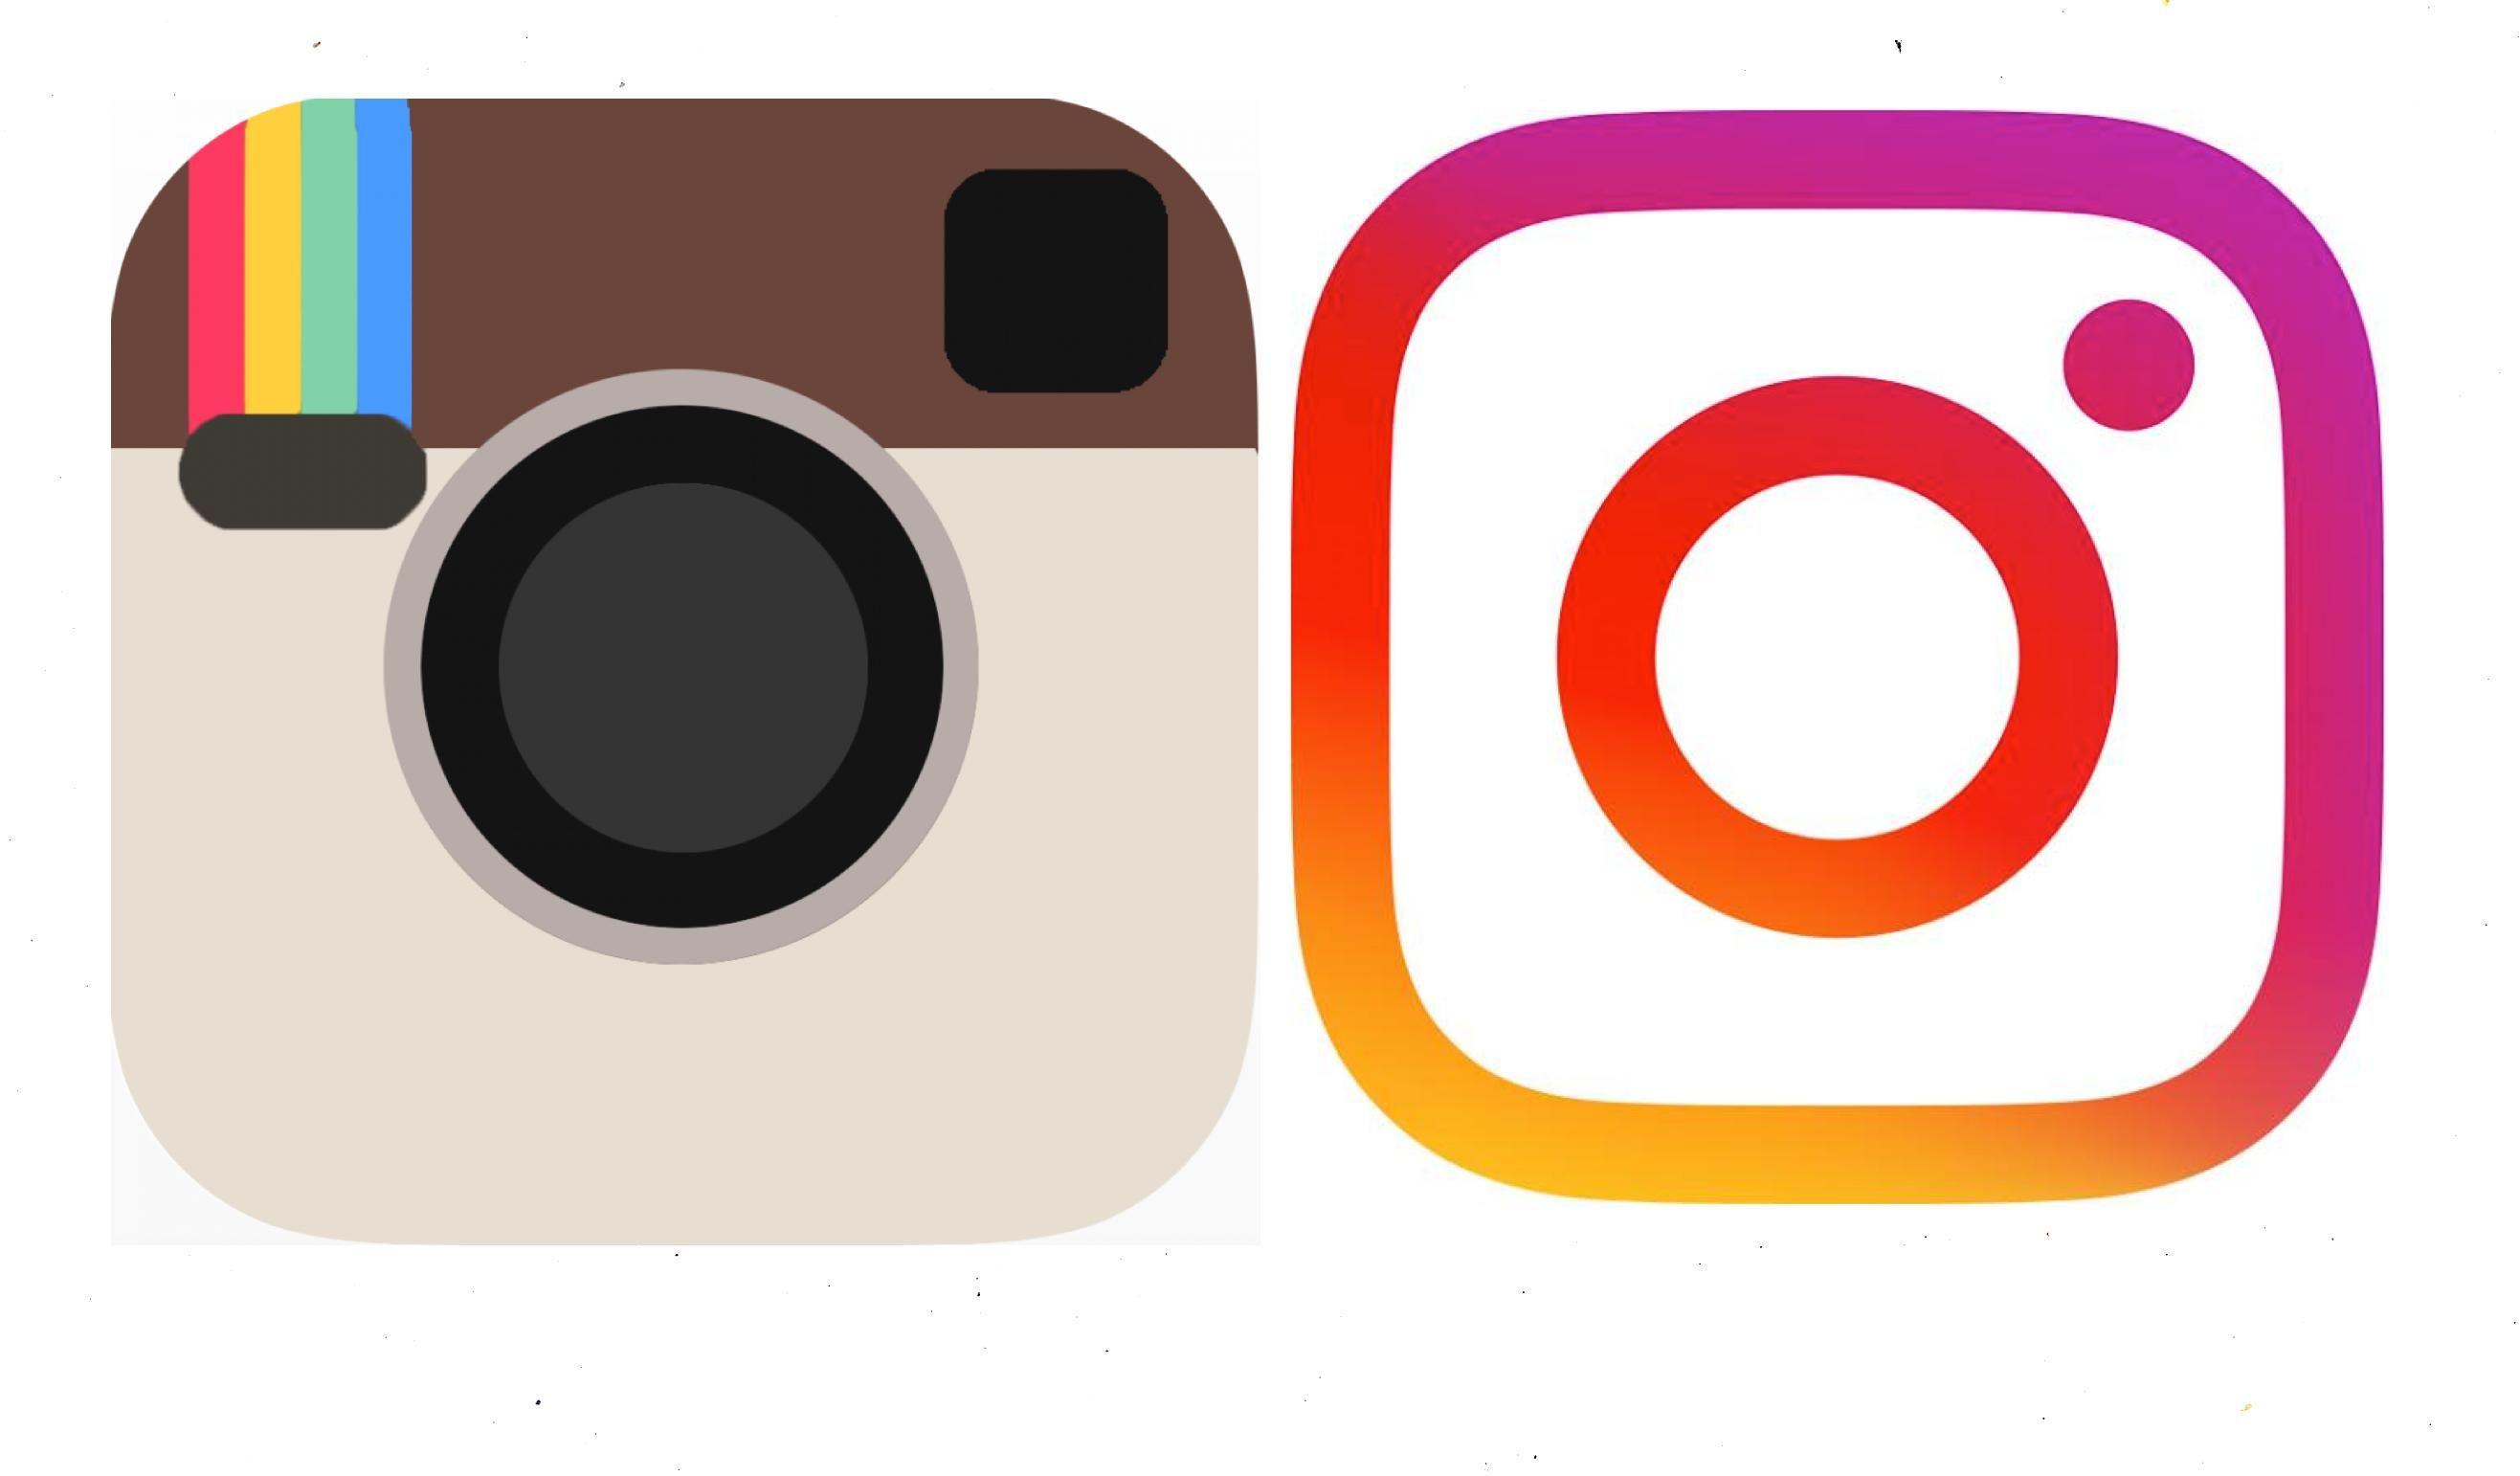 Instagram Time Logo - Instagram Has A New Logo For The First Time Since Its Launch